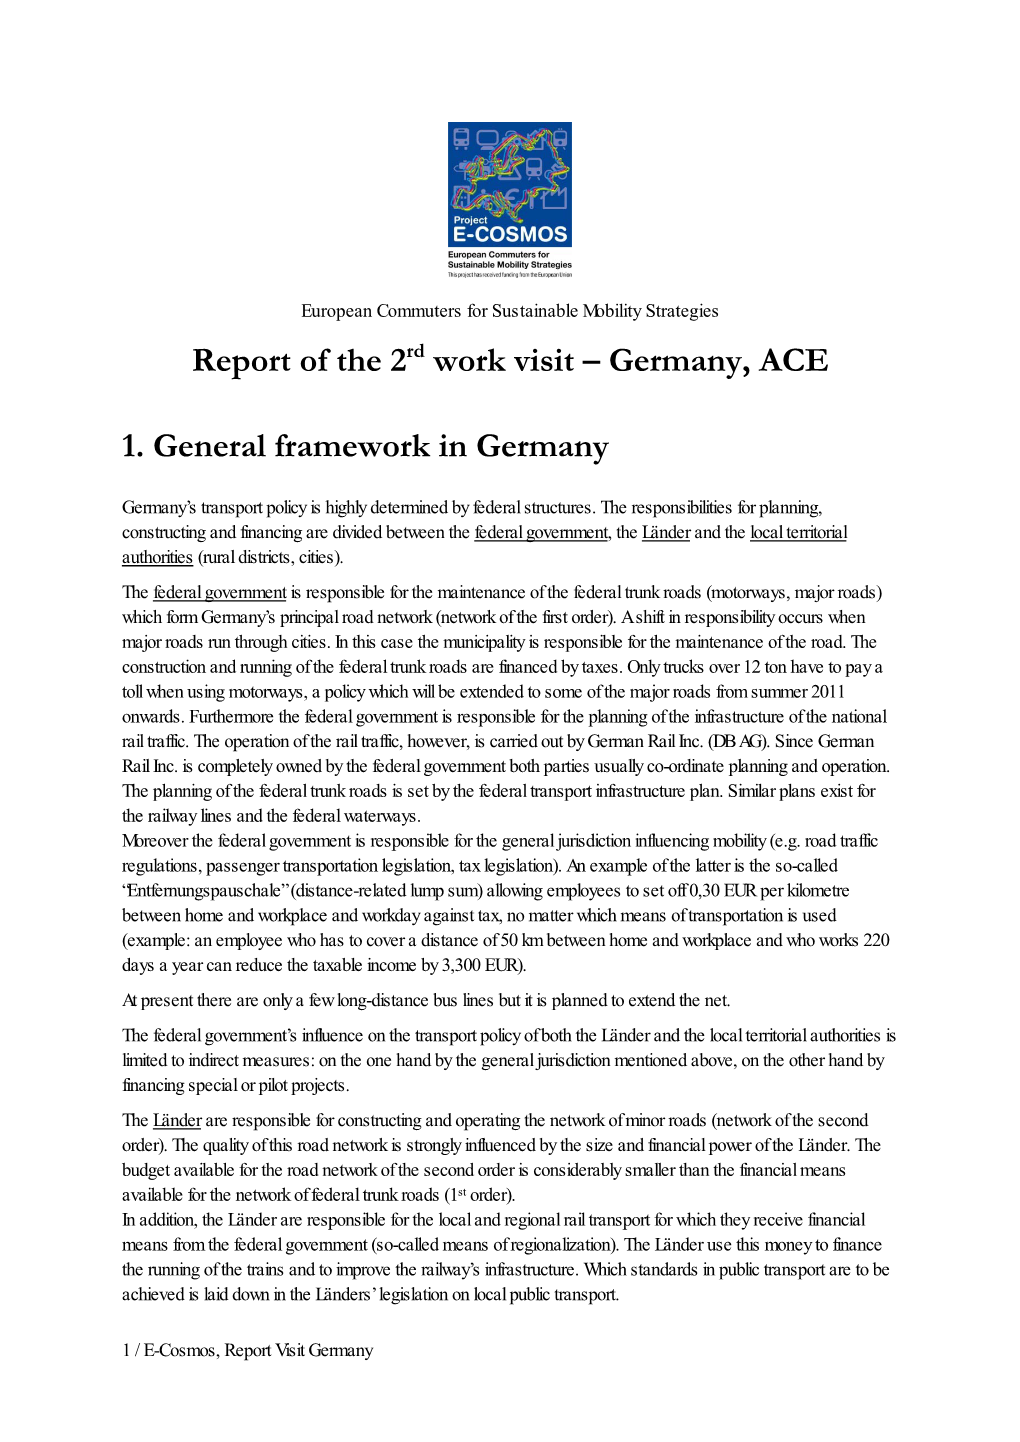 Report of the 2Rd Work Visit – Germany, ACE 1. General Framework In